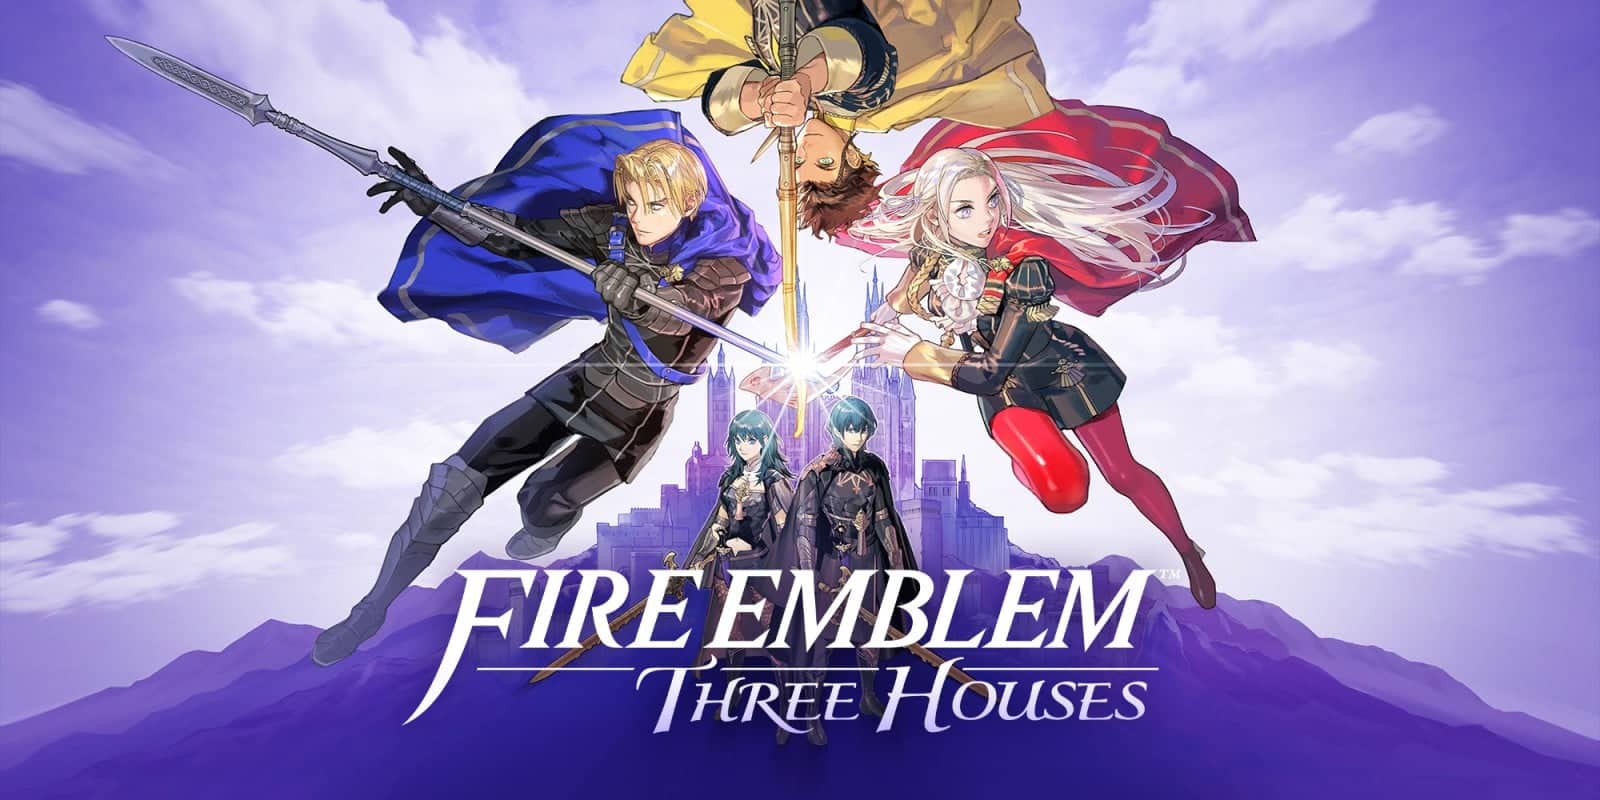 Fire Emblem Three Houses Nintendo Switch Version Full Game Free Download 2019